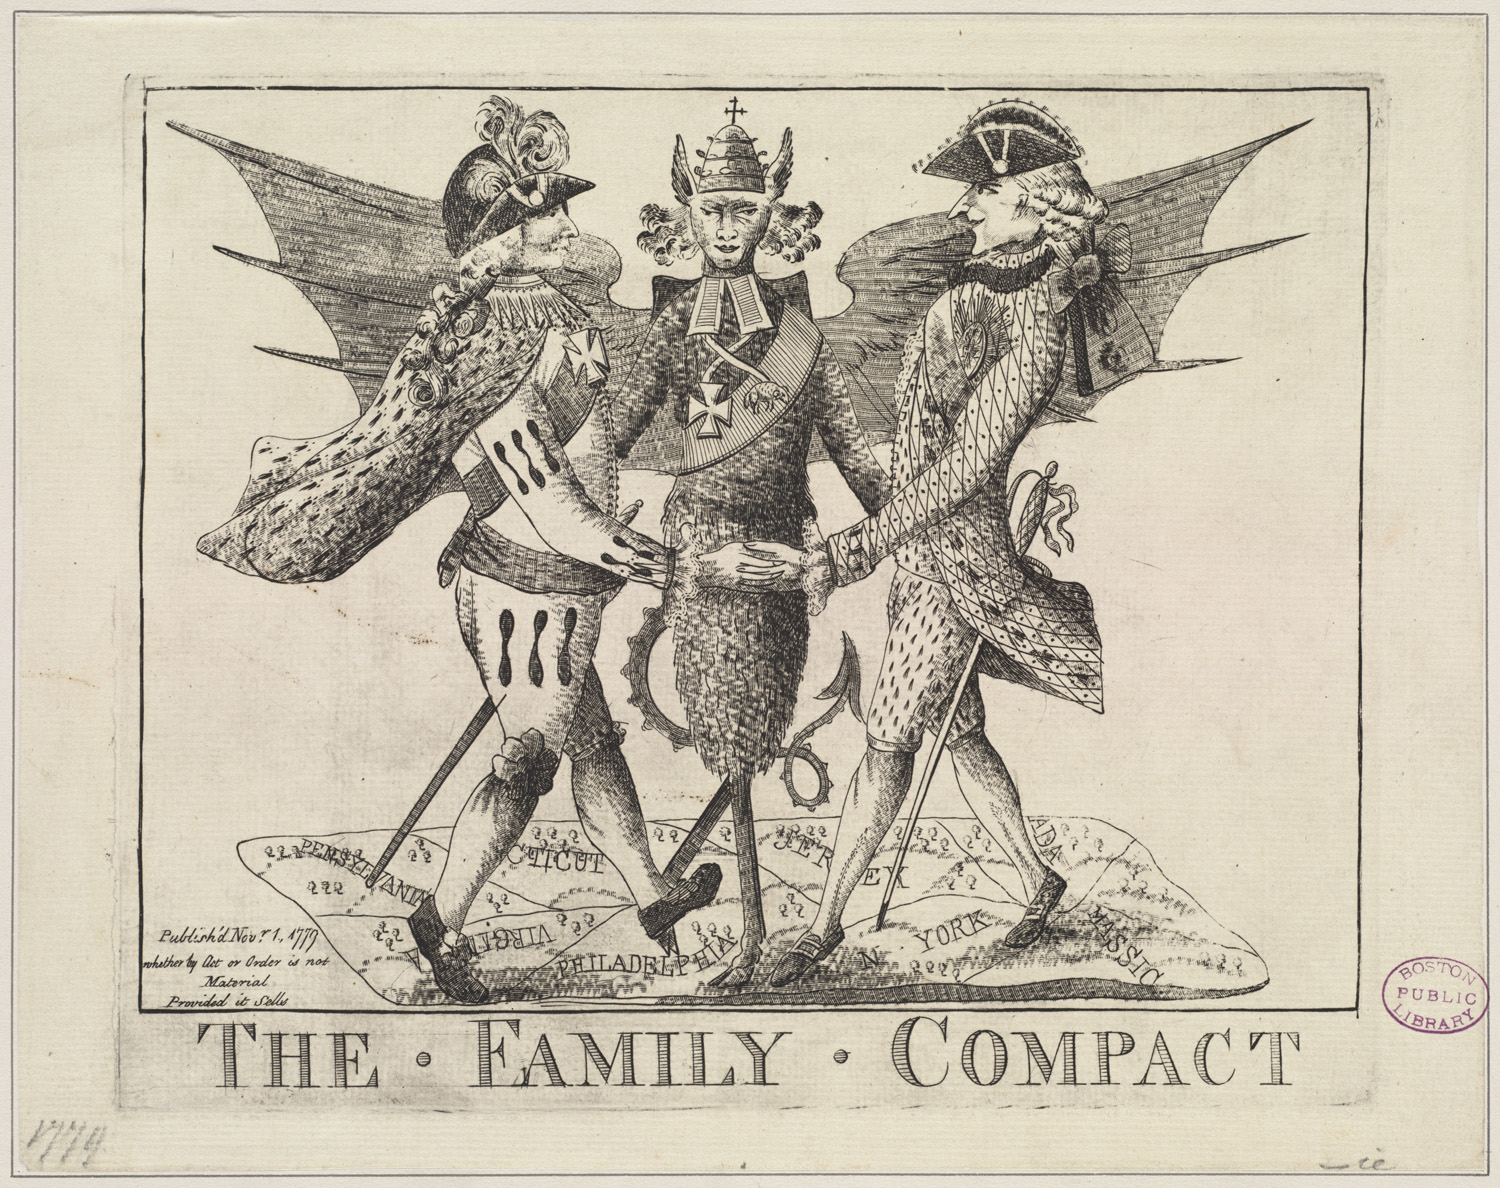 File:The family compact.jpg